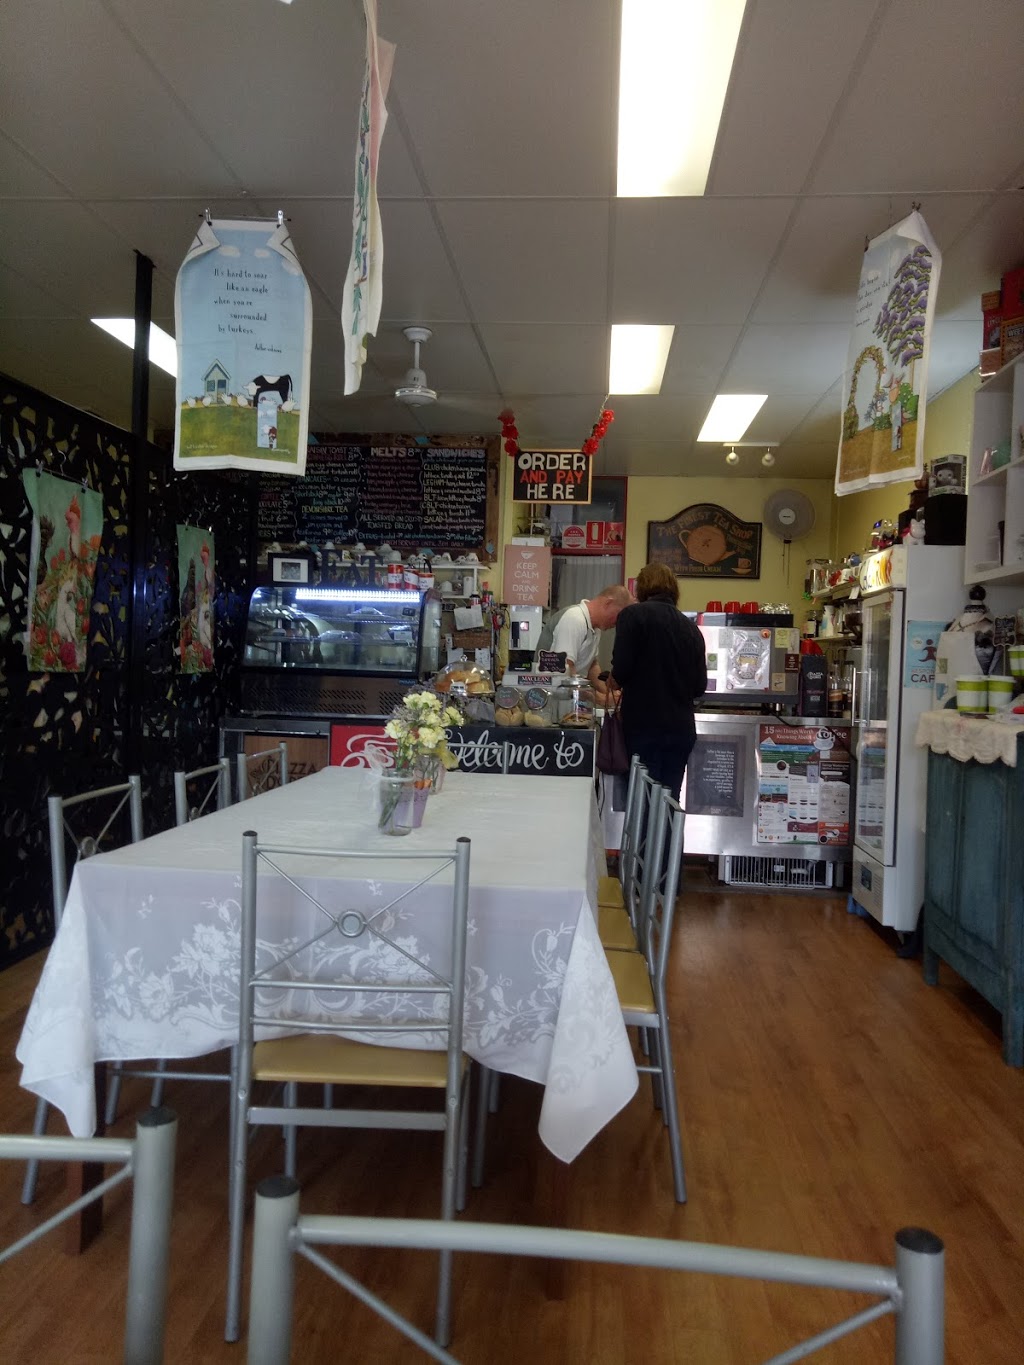 Tea On The Terrace | cafe | 2/18 River St, Maclean NSW 2463, Australia | 0266453033 OR +61 2 6645 3033